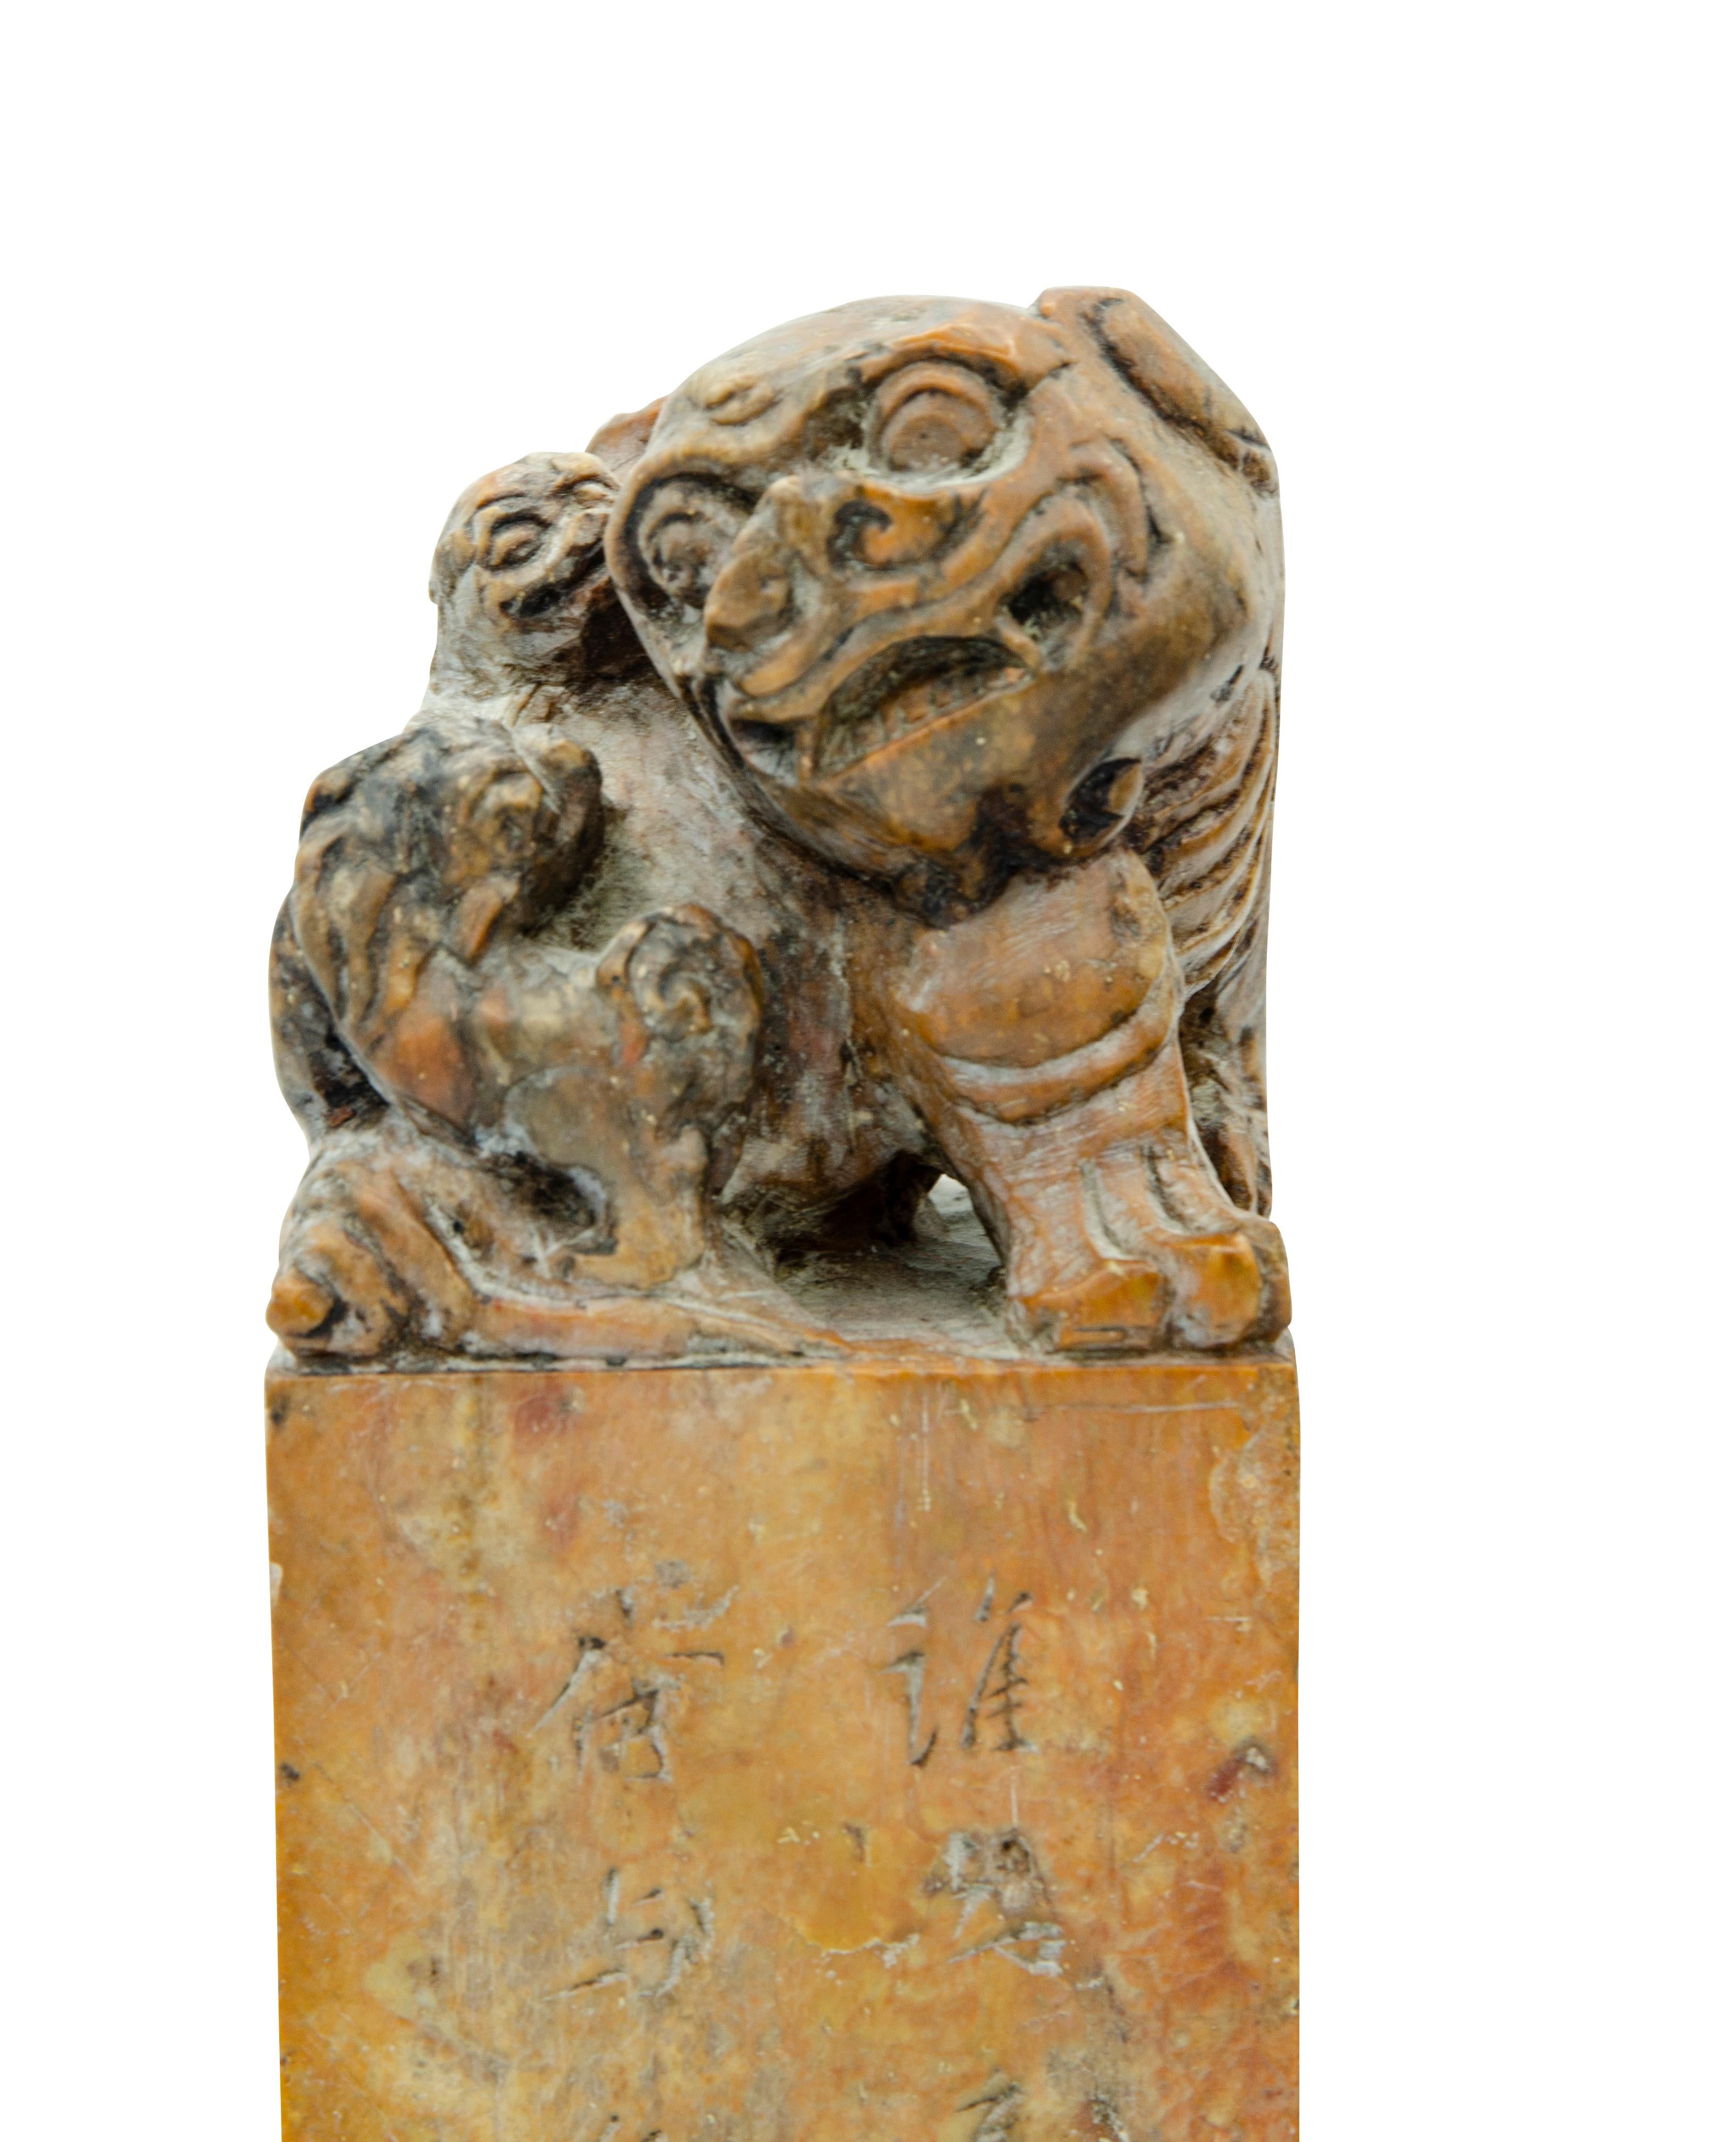 With foo dog carved finials.